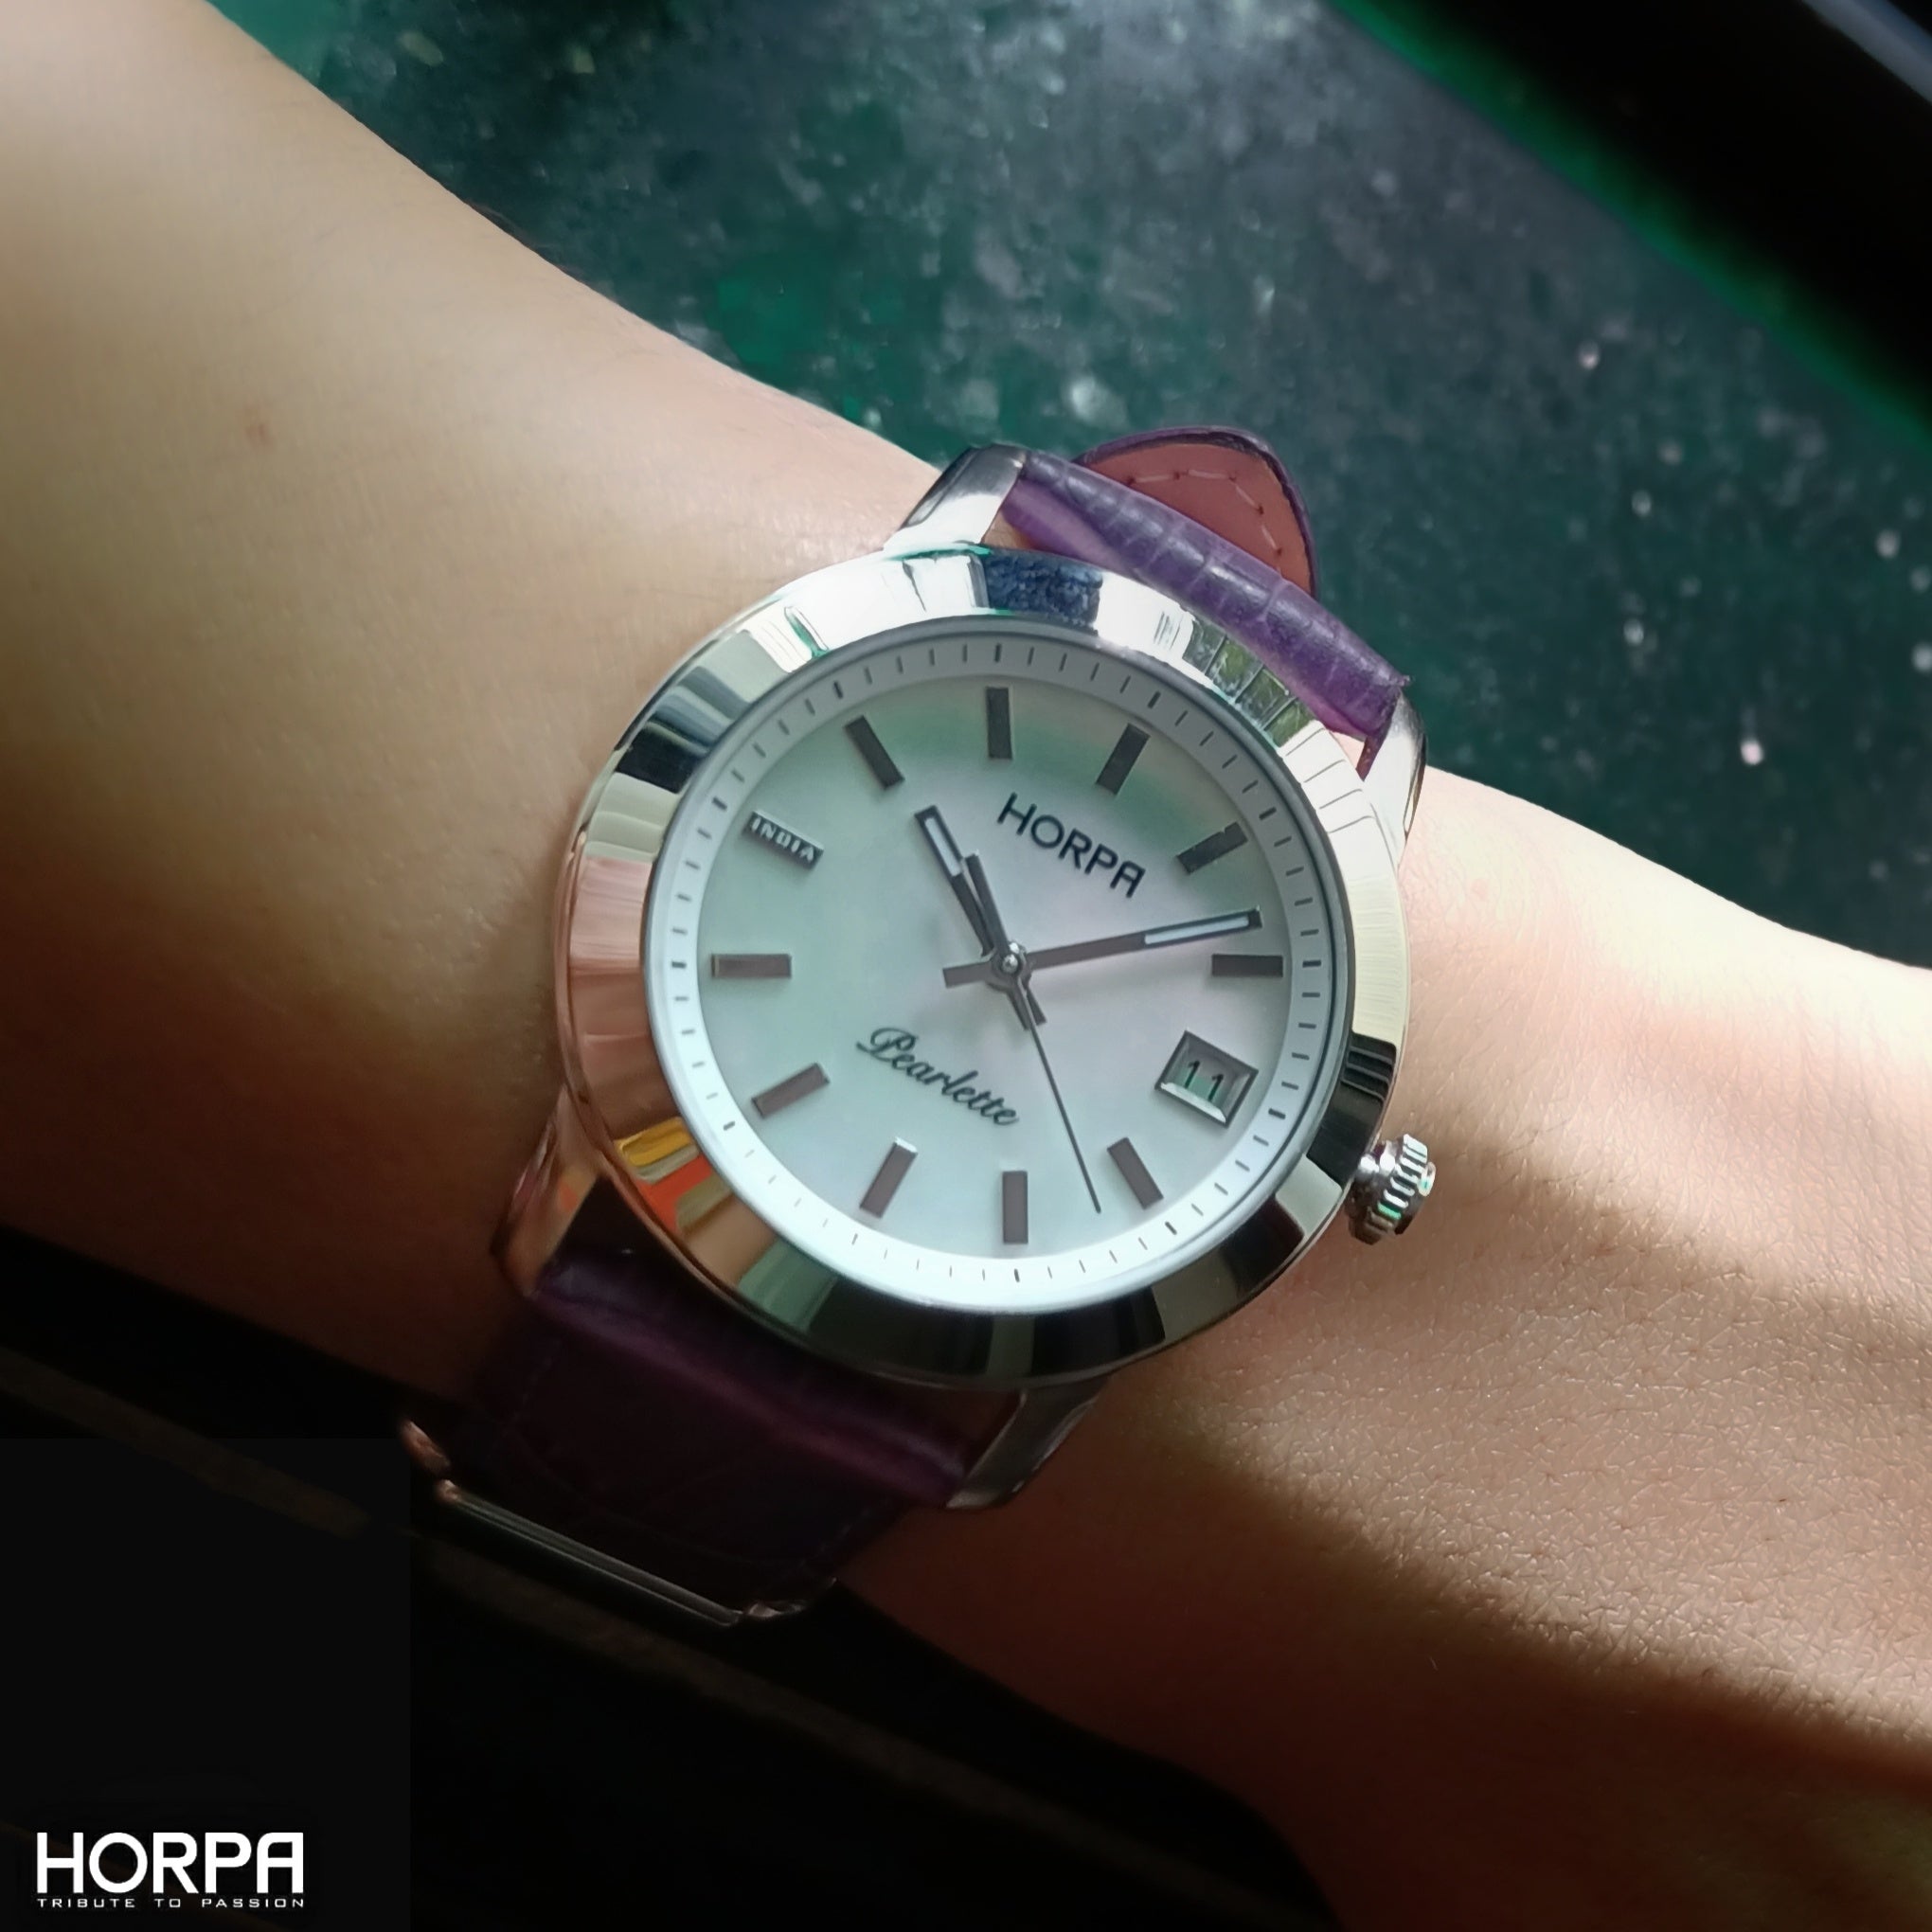 Horpa Oyster women's everyday analog watch